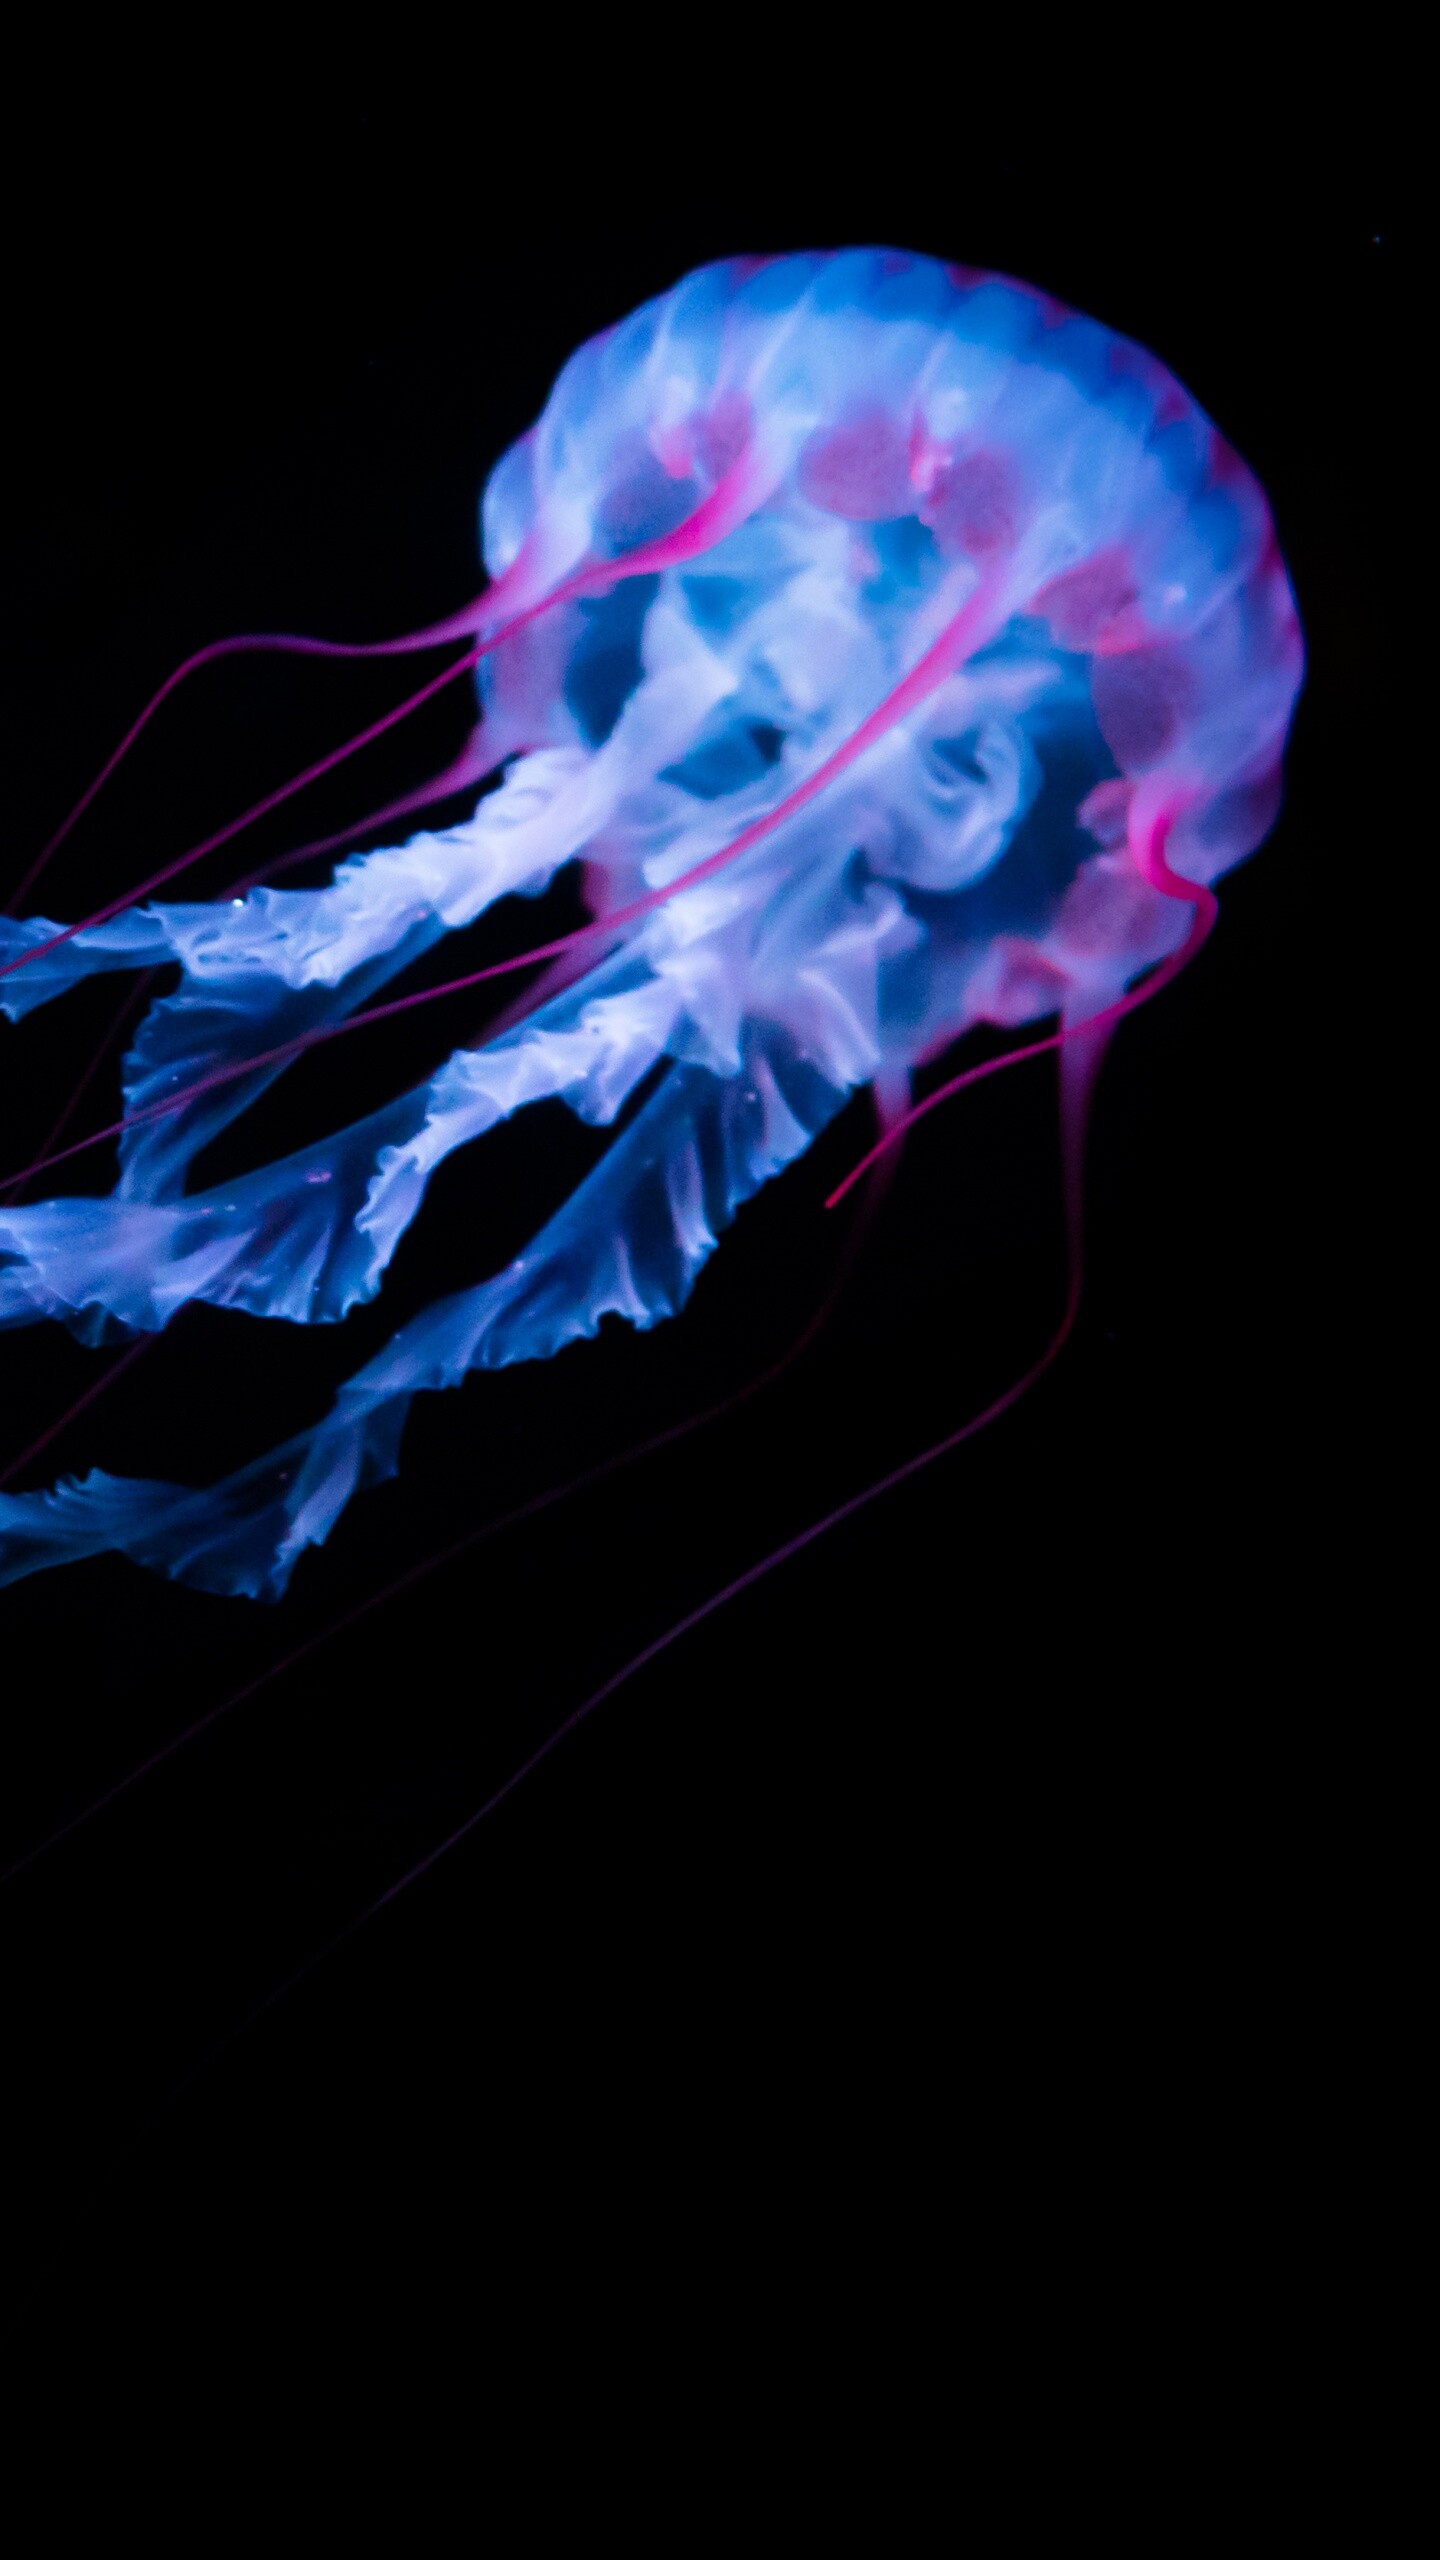 Glowing Jellyfish: A nearly transparent saucer-shaped body, Extensible marginal tentacles studded with stinging cells. 1440x2560 HD Wallpaper.